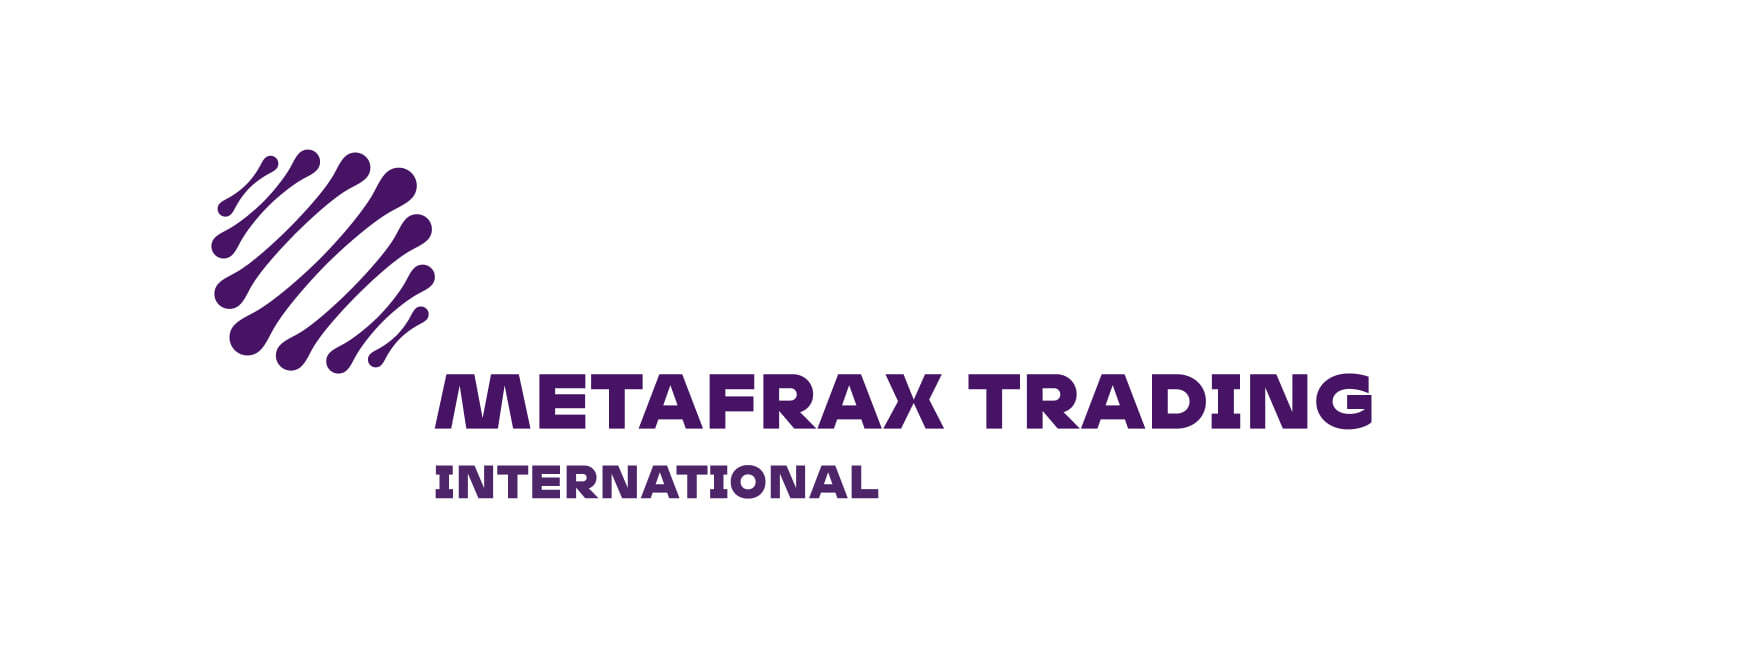 Metafrax Trading International registered a fiscal representative office in the Netherlands